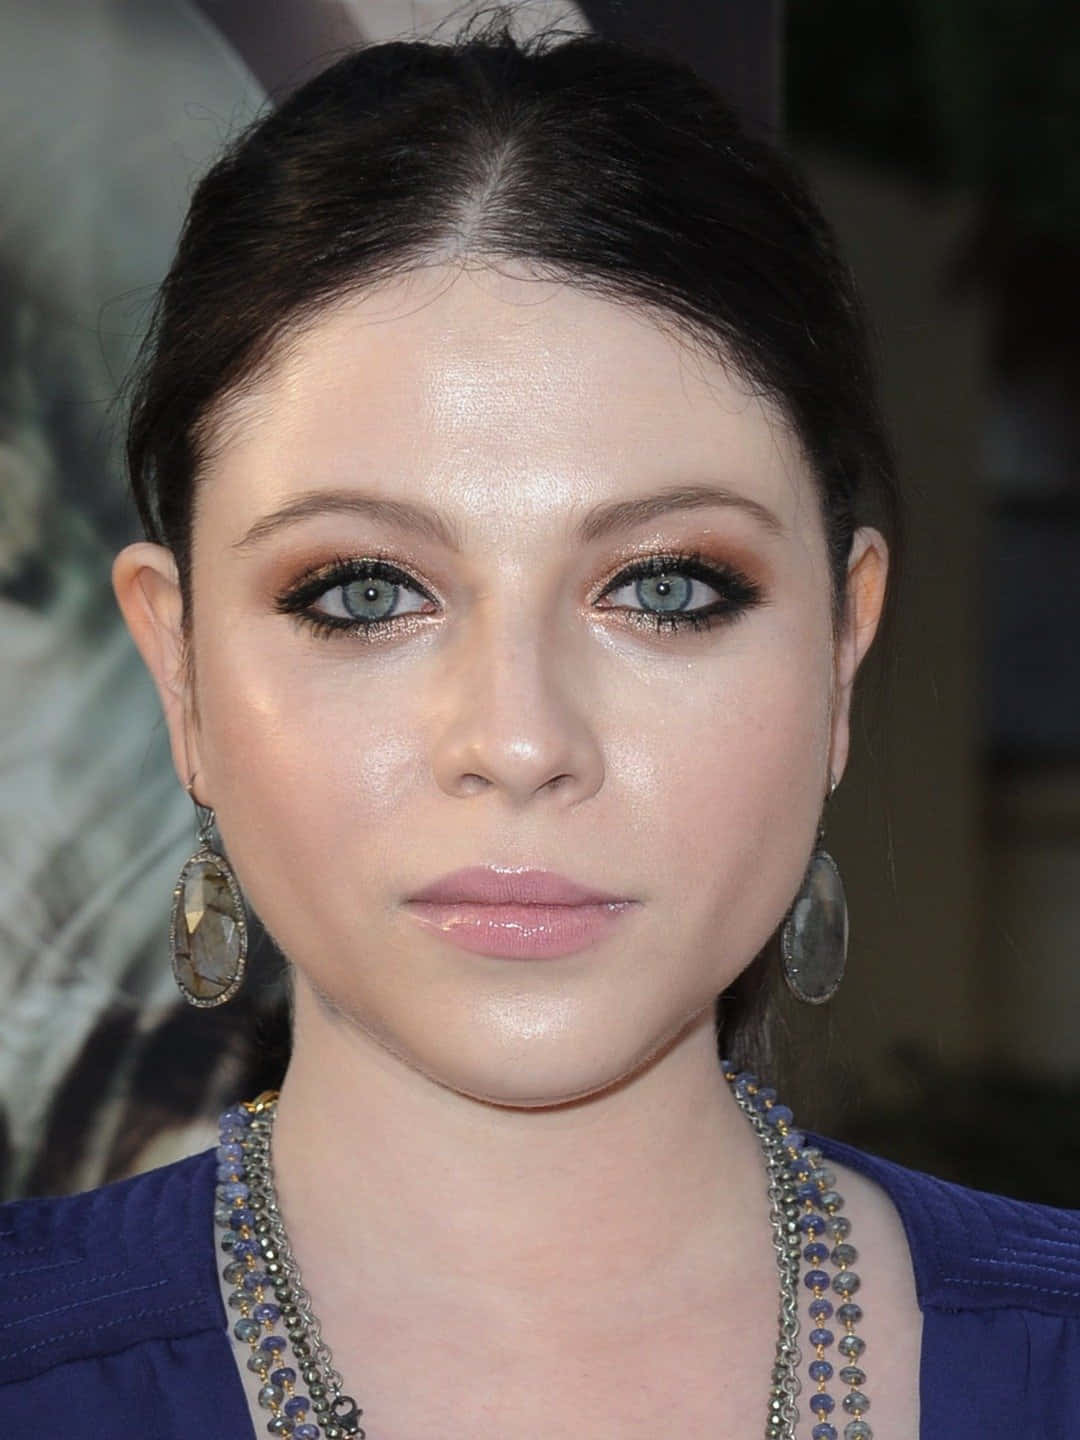 Michelle Trachtenberg striking a pose in a stylish outfit Wallpaper